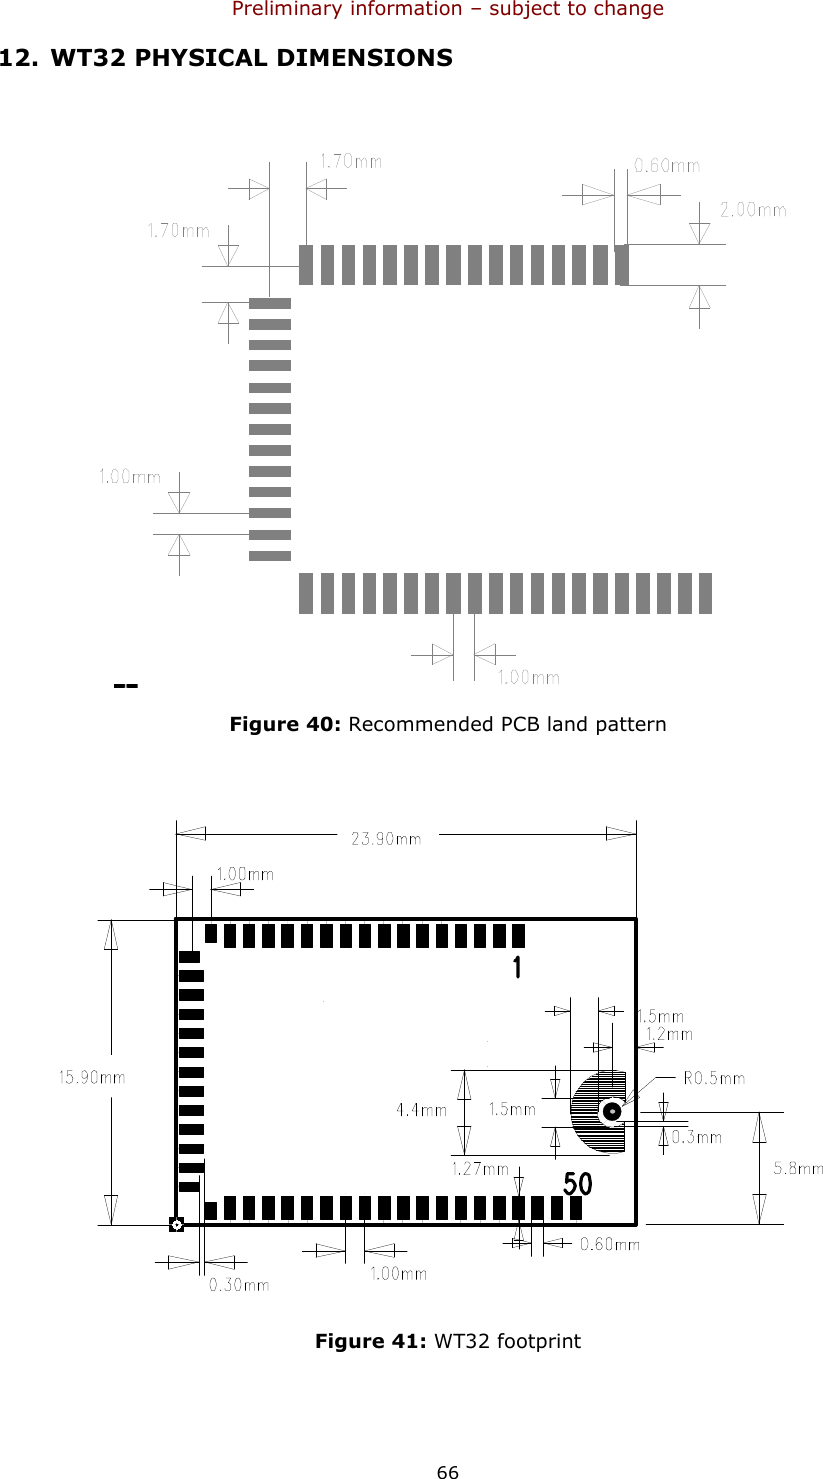 Preliminary information – subject to change  66 12. WT32 PHYSICAL DIMENSIONS   Figure 40: Recommended PCB land pattern   Figure 41: WT32 footprint 